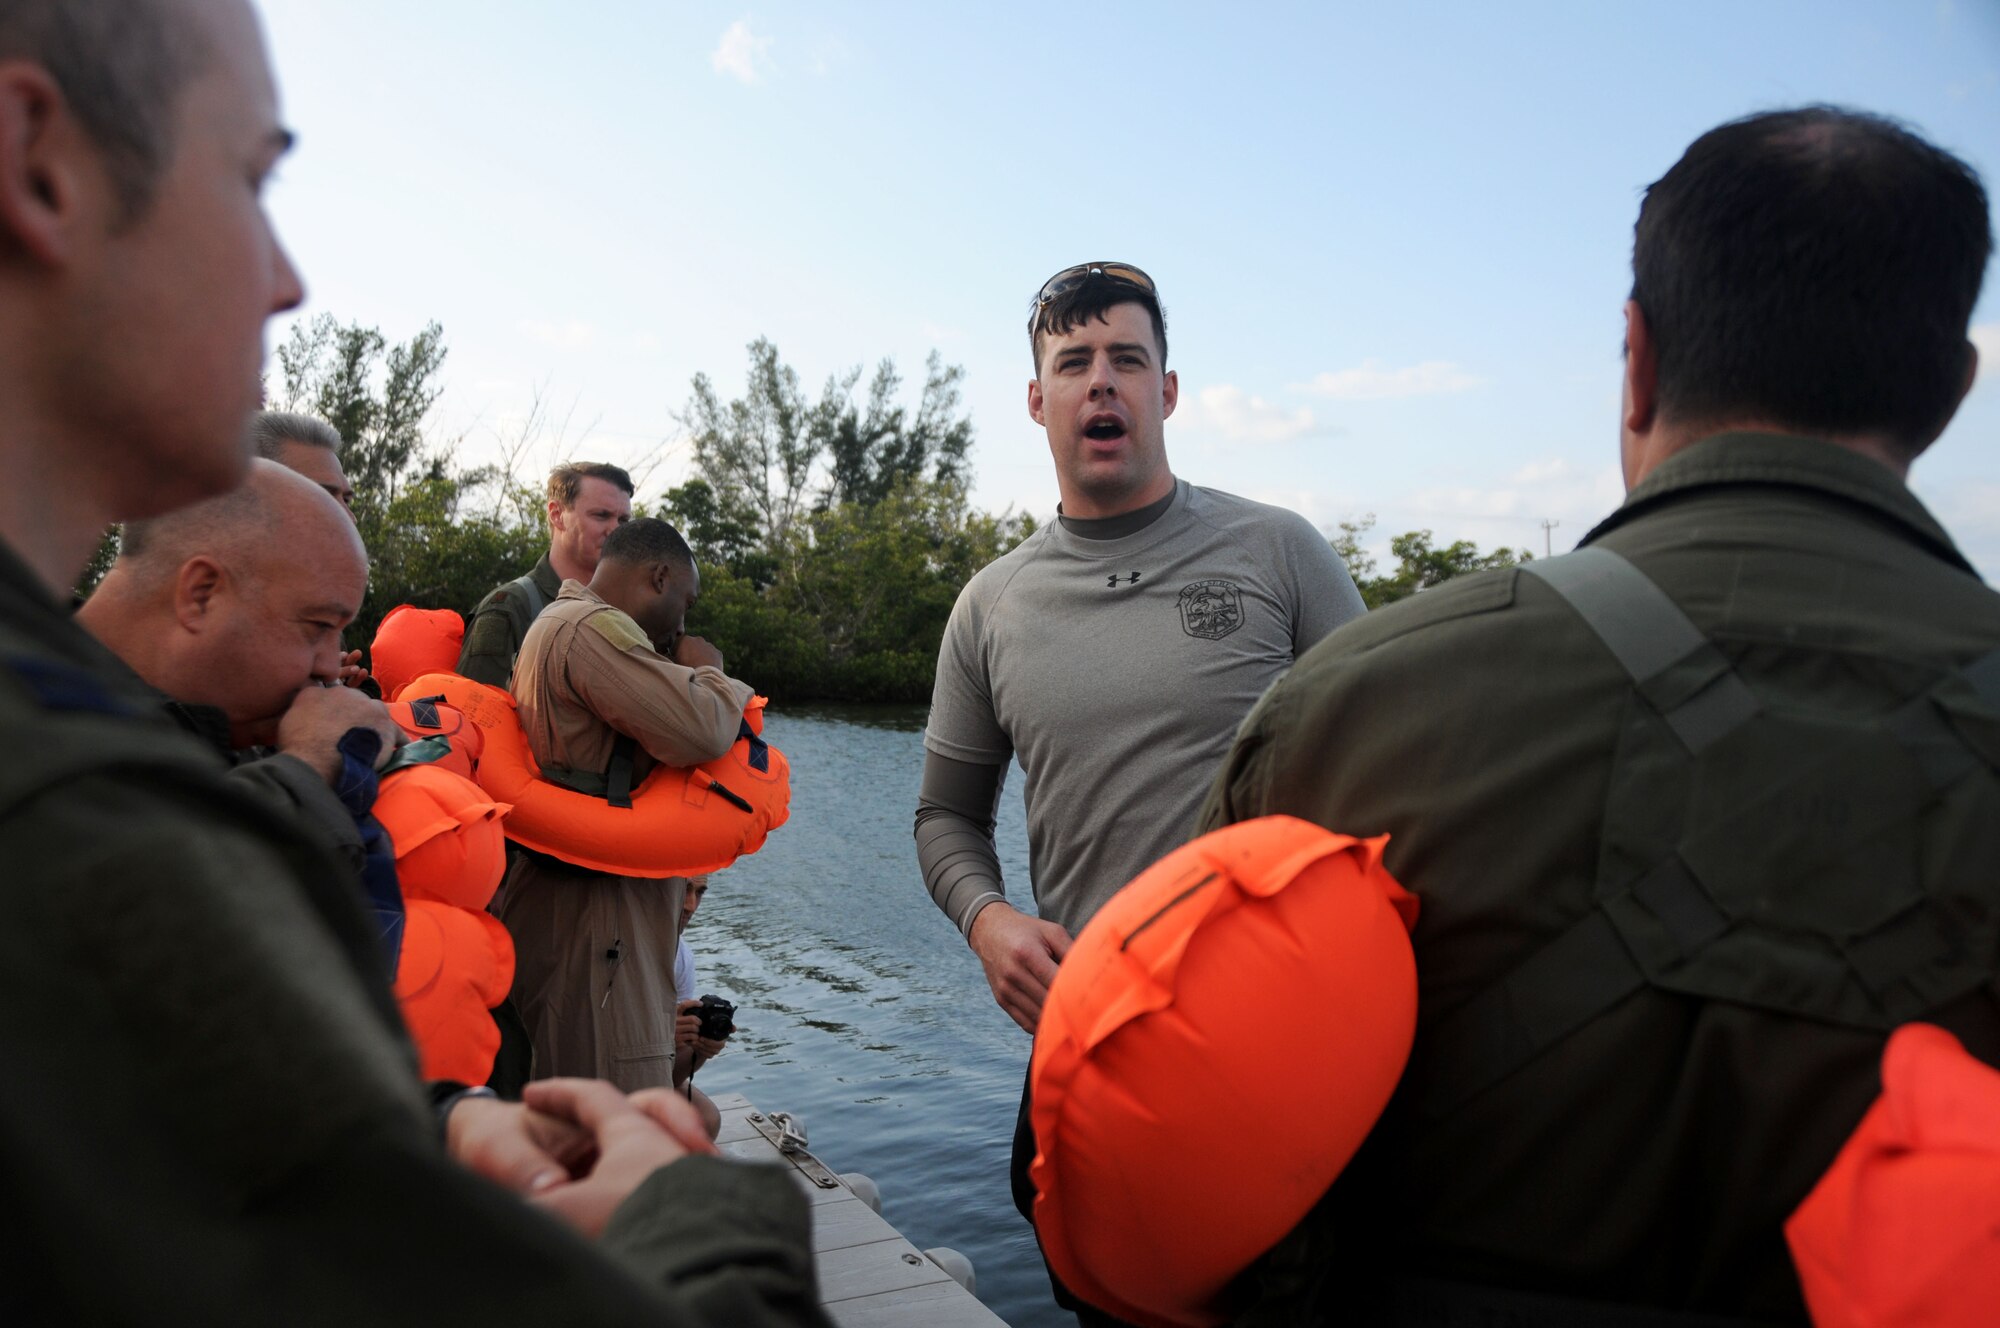 A Survival, Evade, Resistance and Escape trainer instructs members of the 94th Operations Group during Water Survival Training at Naval Air Station Key West, Florida March 27, 2019. During the two-day Survival, Evasion, Resistance and Escape course Airmen participated in Self Aid Buddy Care, water survival training, and navigational training in an urban environment. (U.S. Air Force photo/Senior Airman Justin Clayvon)